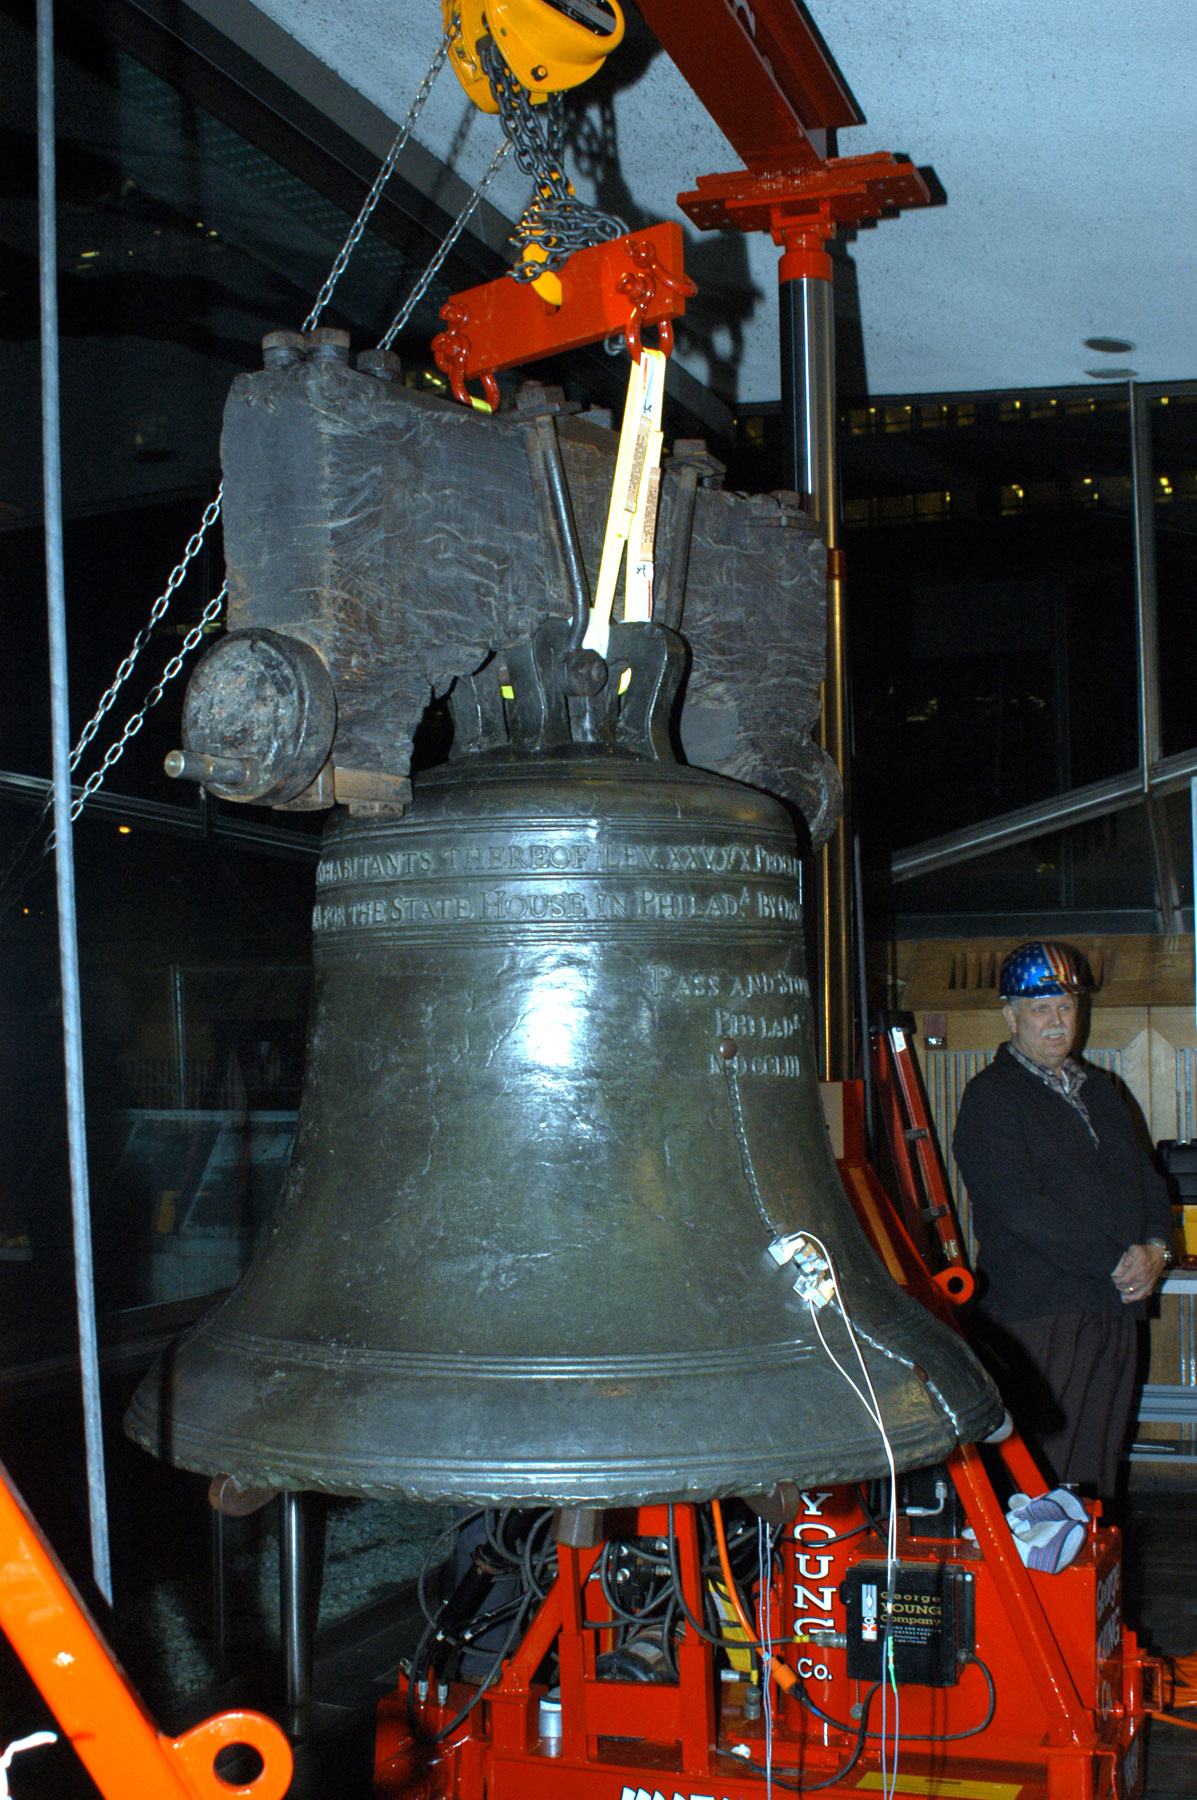 The Liberty Bell hangs free